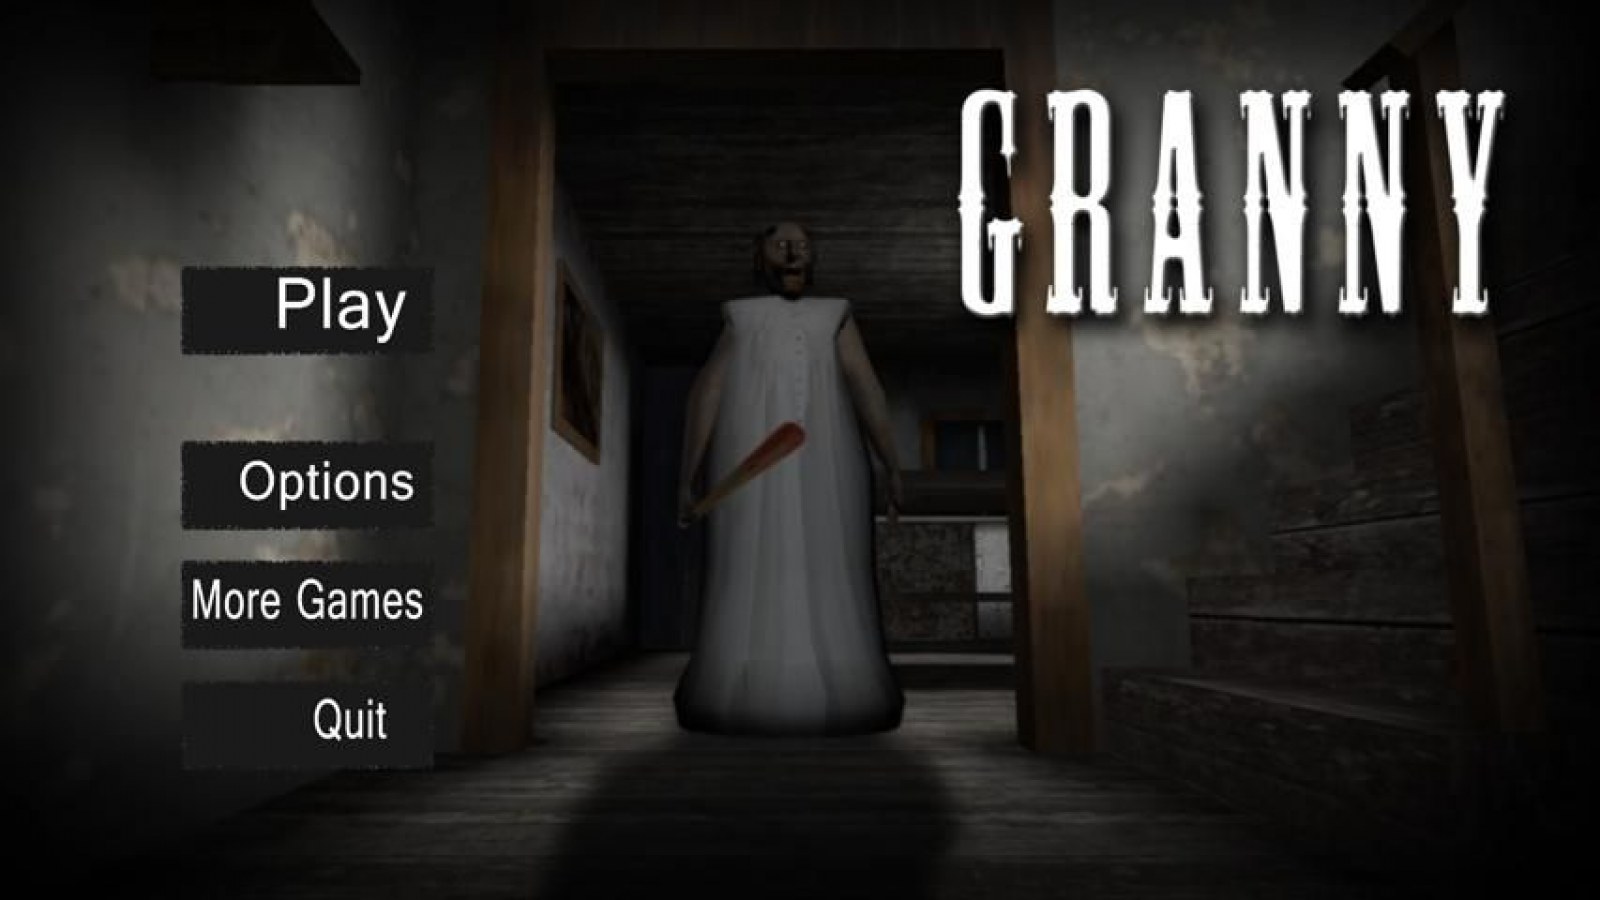 How To Beat Granny Horror Game Tips Steps Strategy For Getting Out Of The House Alive - code roblox granny